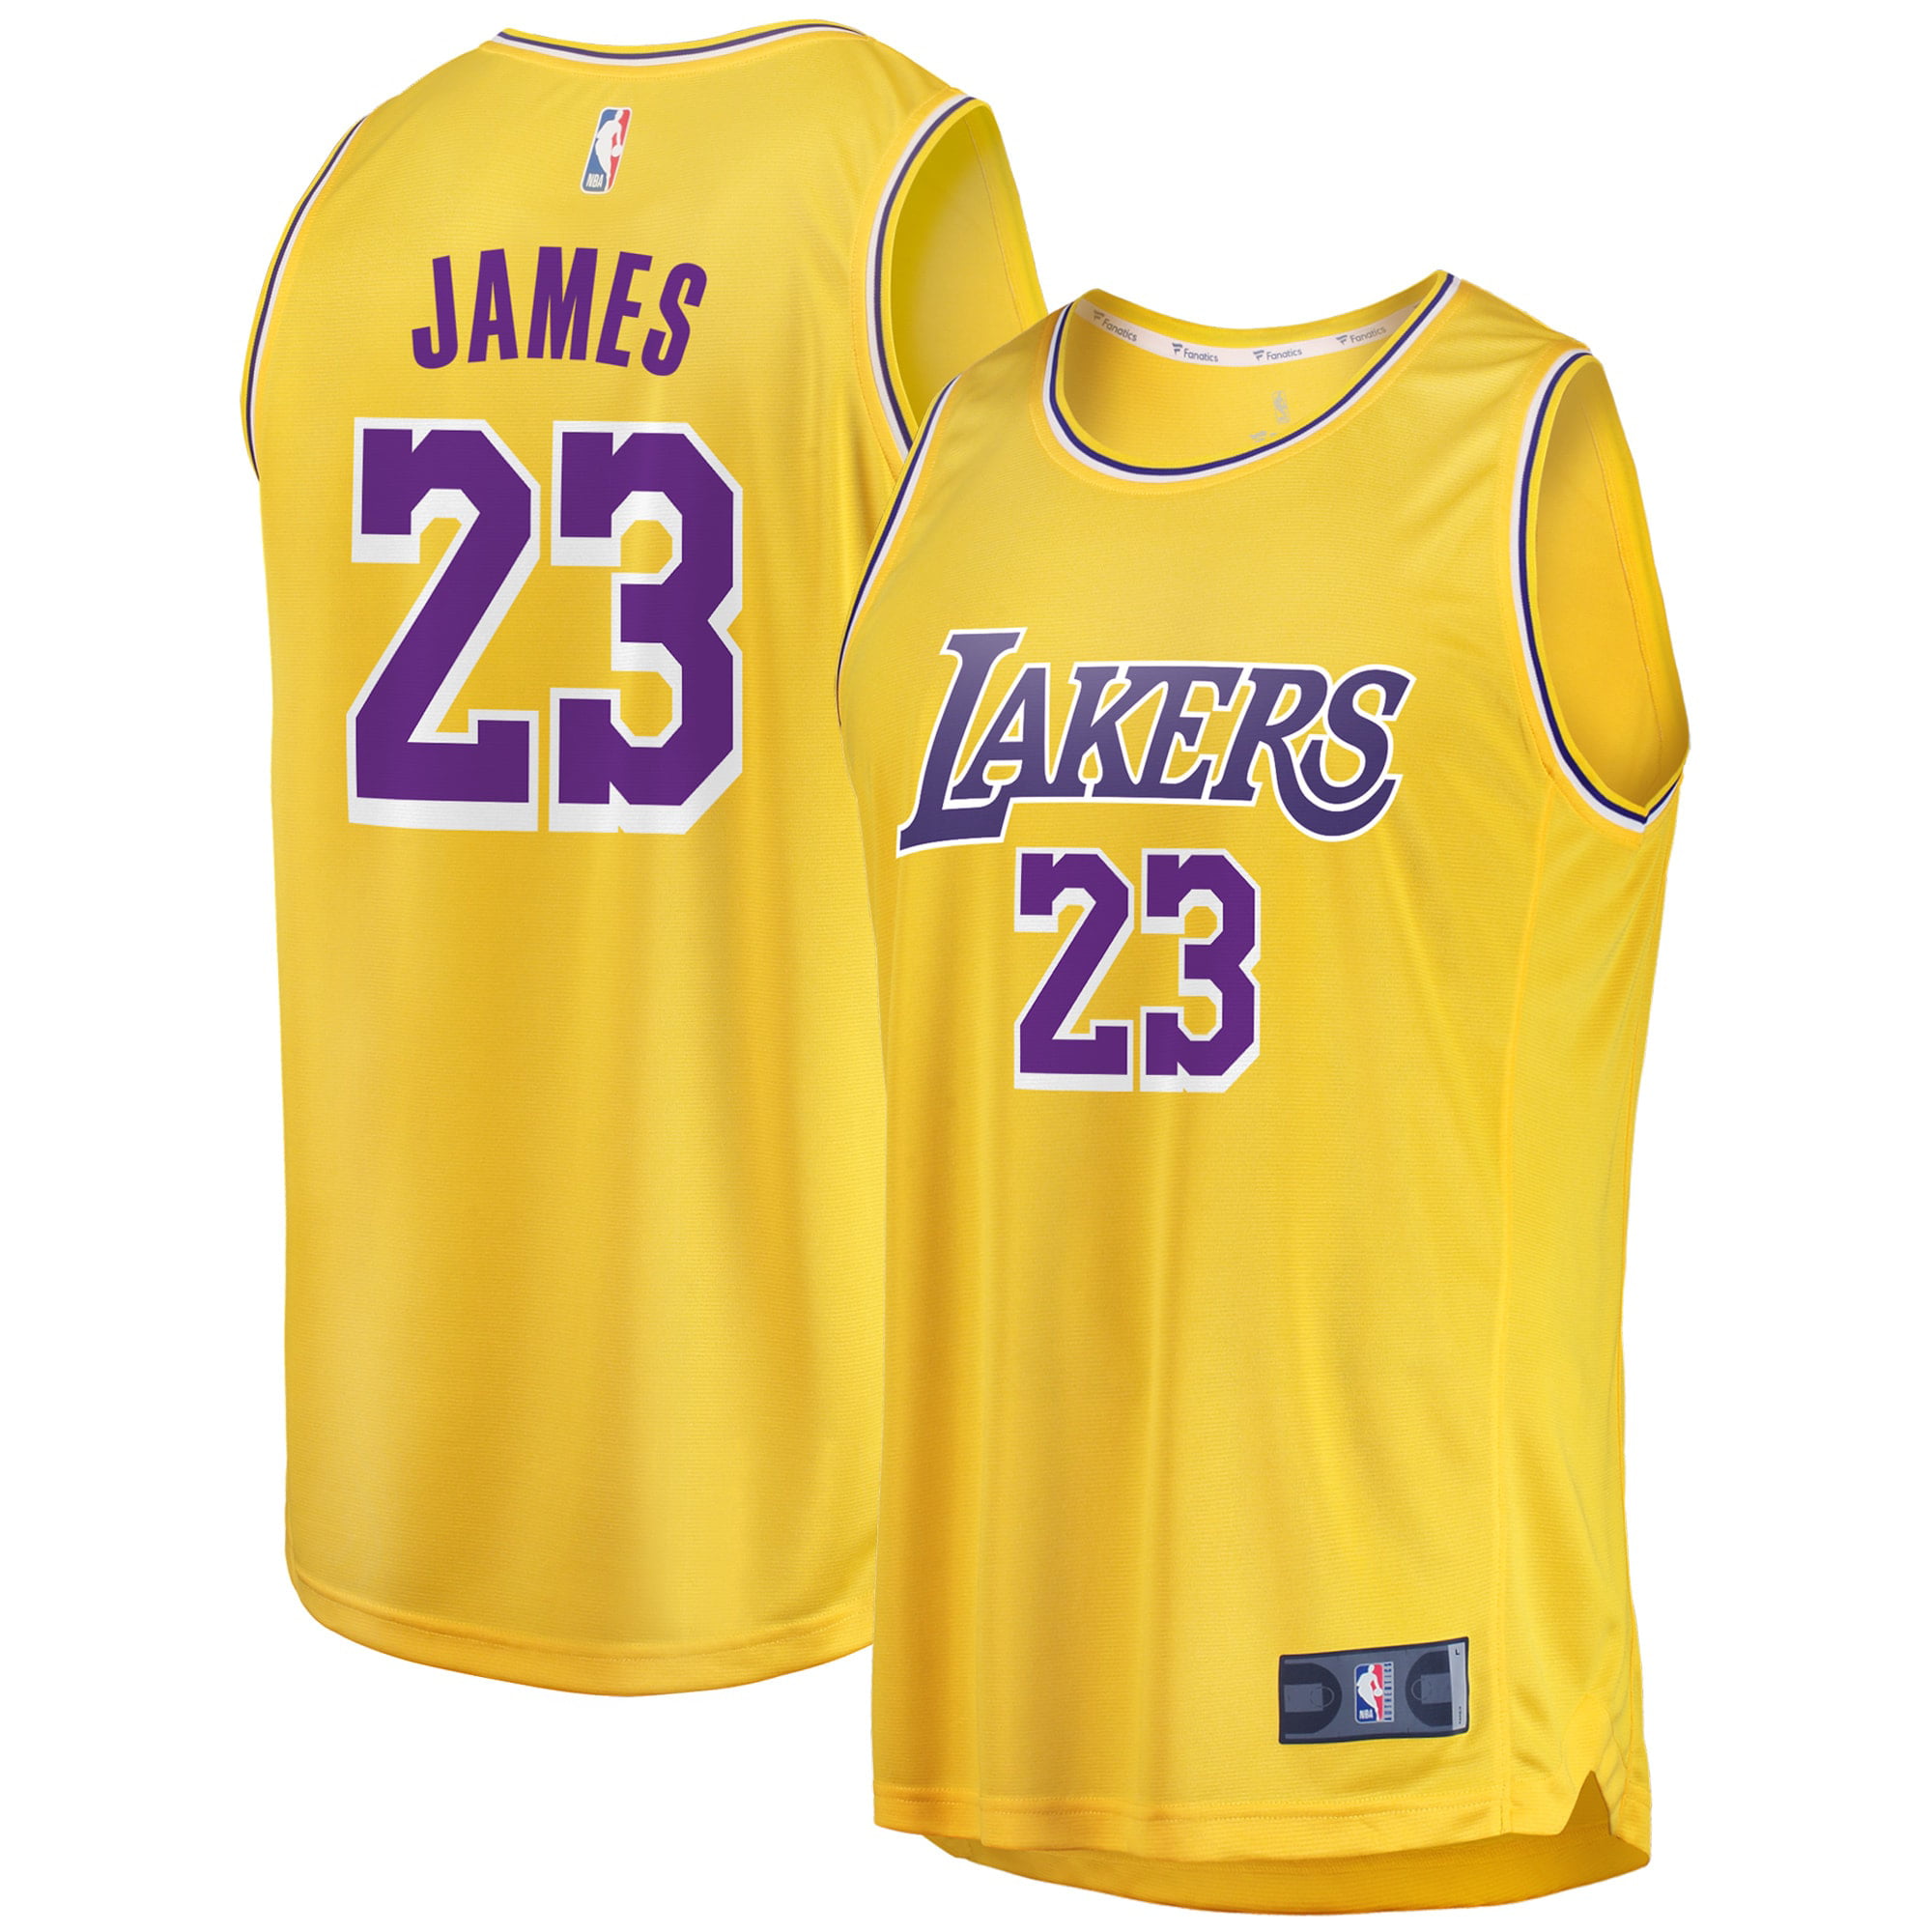 los angeles lakers 2019 jersey